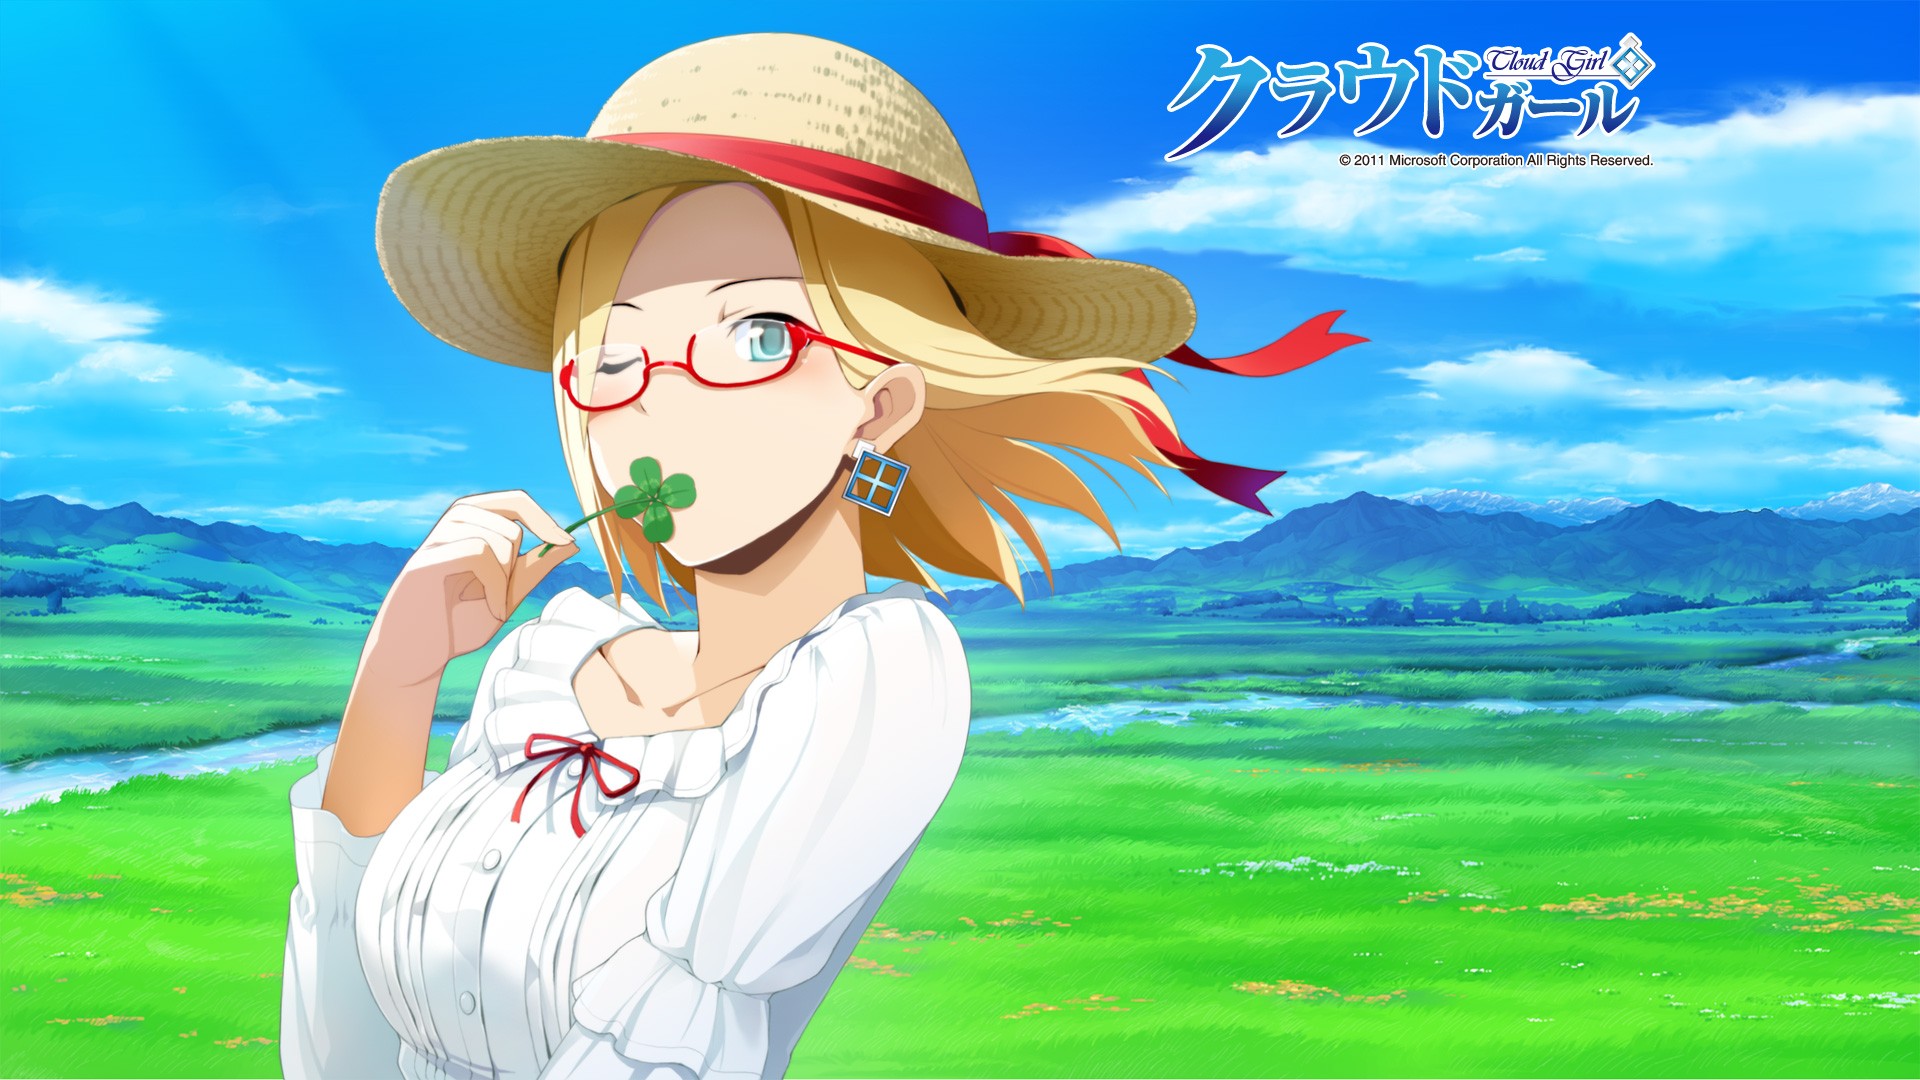 blondes, Clouds, Landscapes, Nature, Text, Blue, Eyes, Glasses, Ribbons, Streams, Short, Hair, Scenic, Earrings, Microsoft, Windows, Meganekko, Os tan, Four, Leaf, Clover, Skyscapes, Hats, Clovers, Claudia, Mado Wallpaper